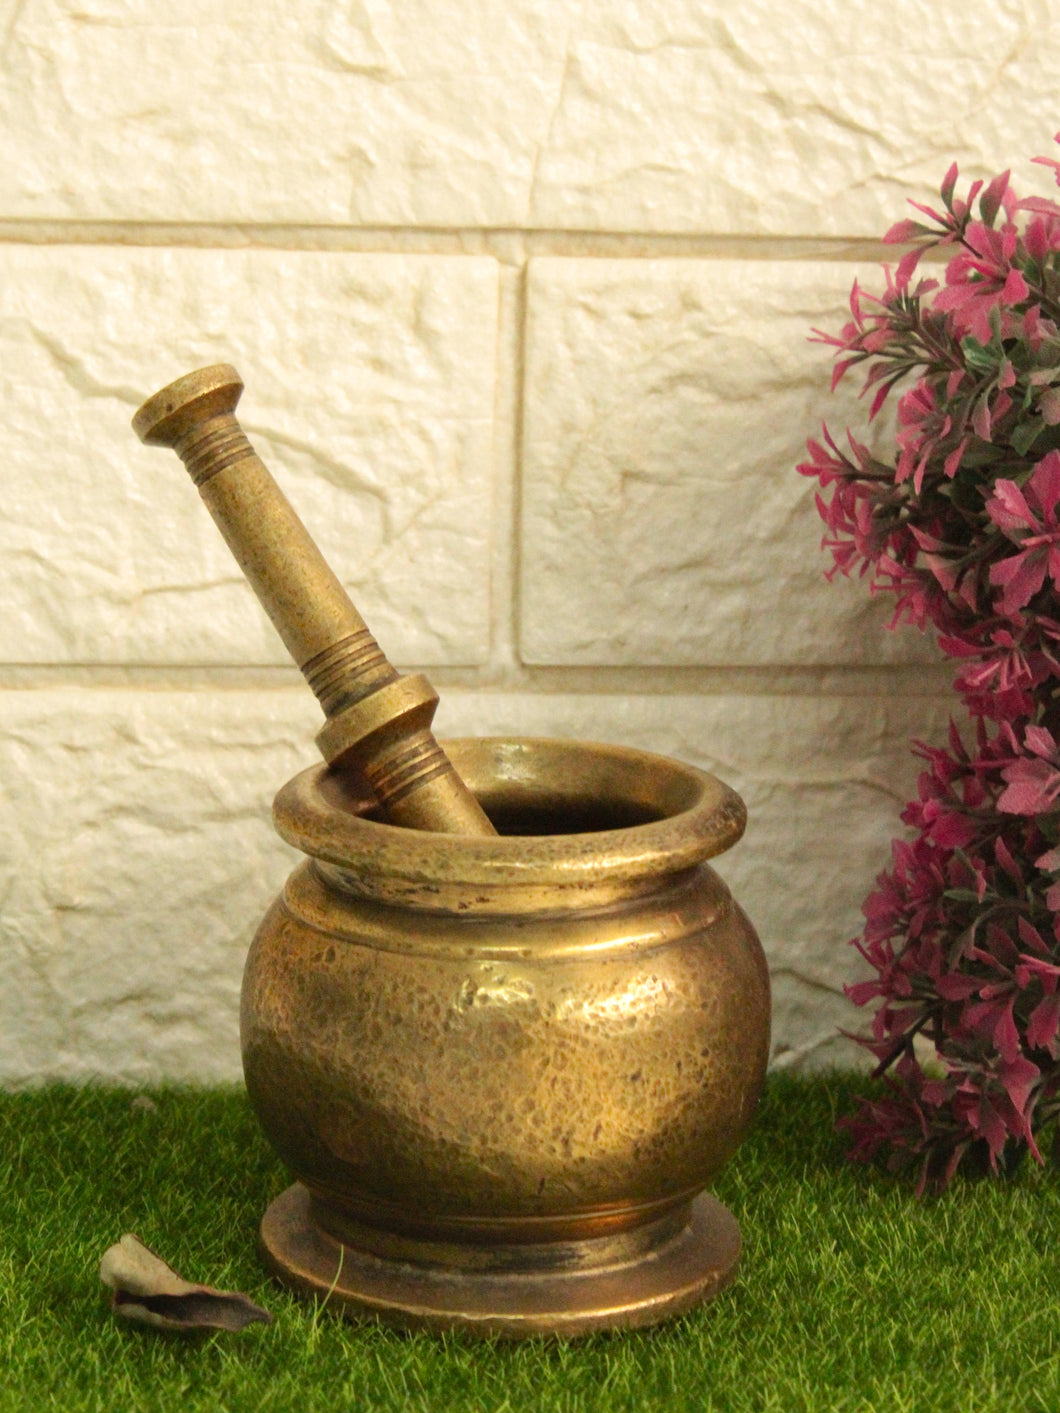 Vintage Brass Mortar and Pestle: A Timeless Culinary Companion